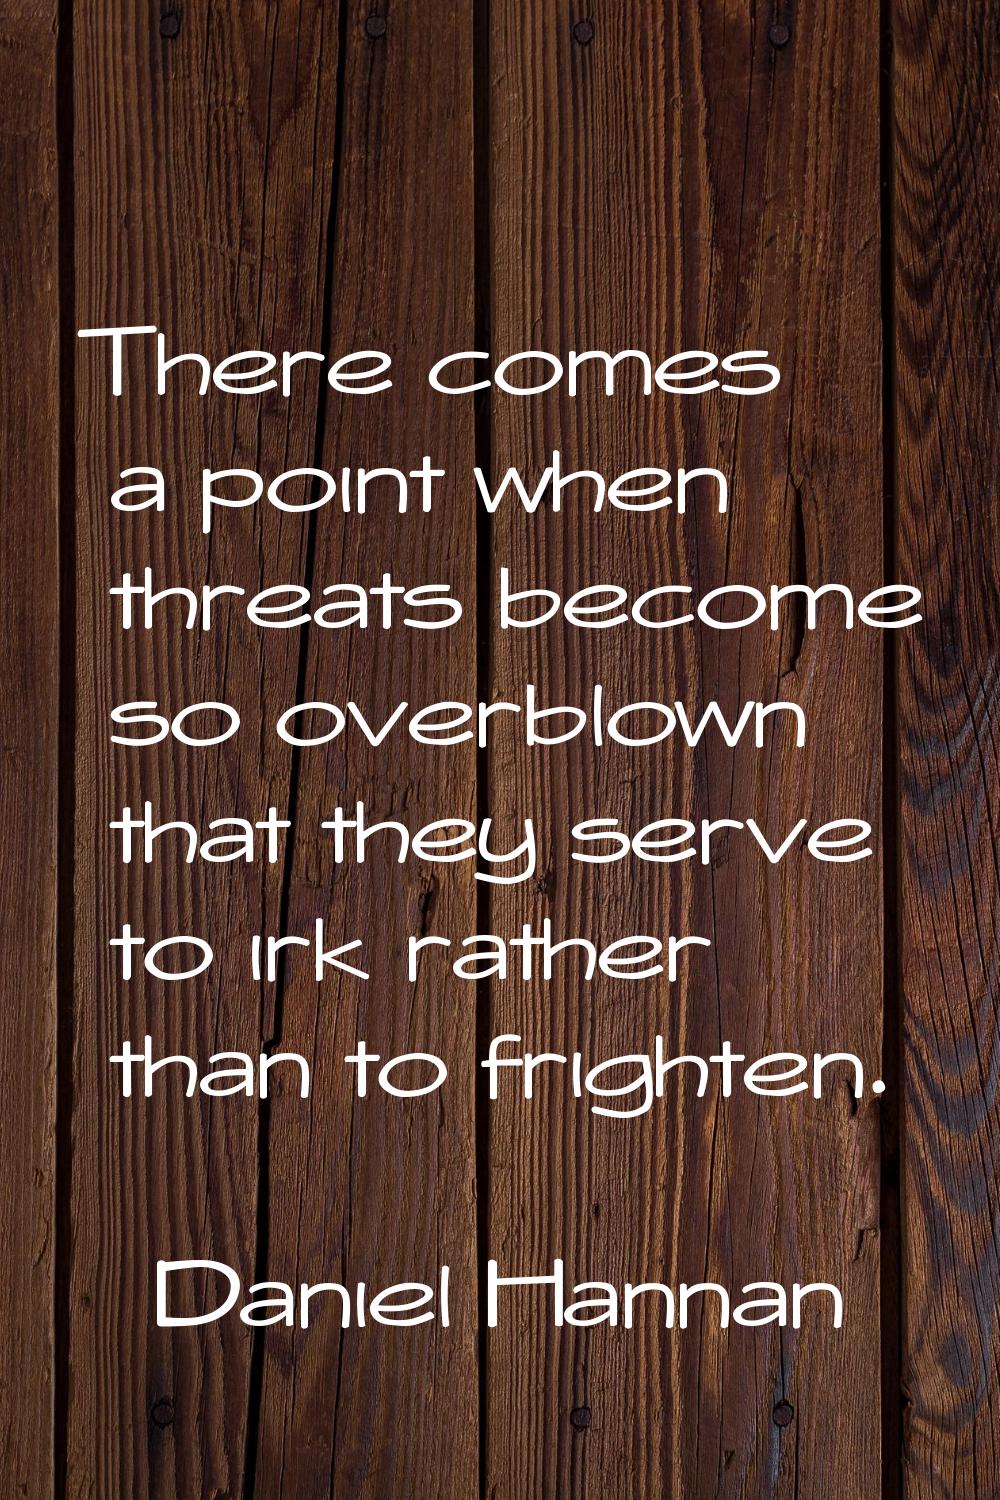 There comes a point when threats become so overblown that they serve to irk rather than to frighten